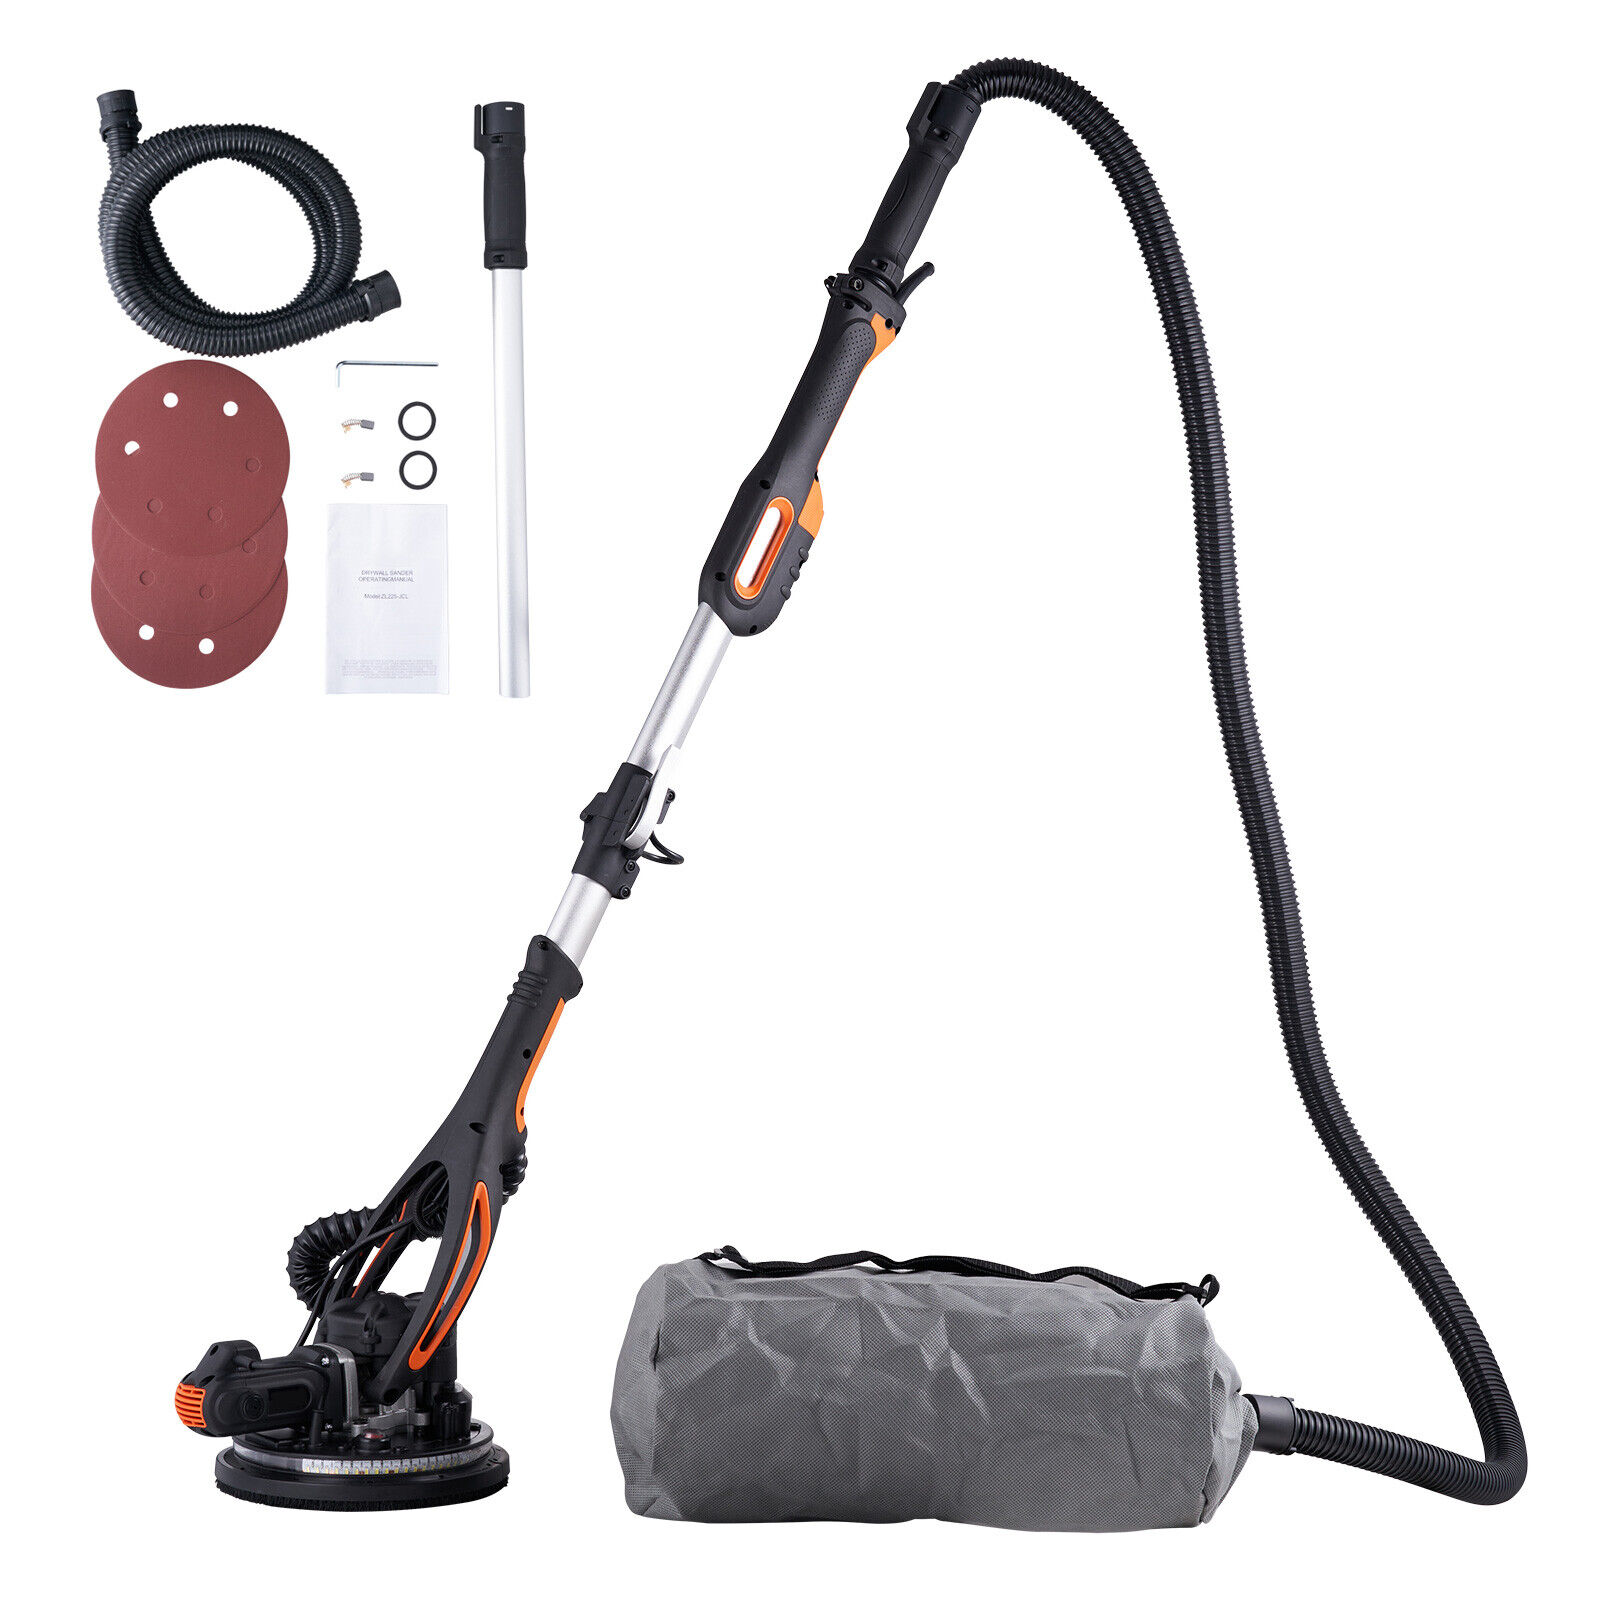 Drywall Sander 900W Brush Motor 800-1800RPM Variable Speed with Self-Suction